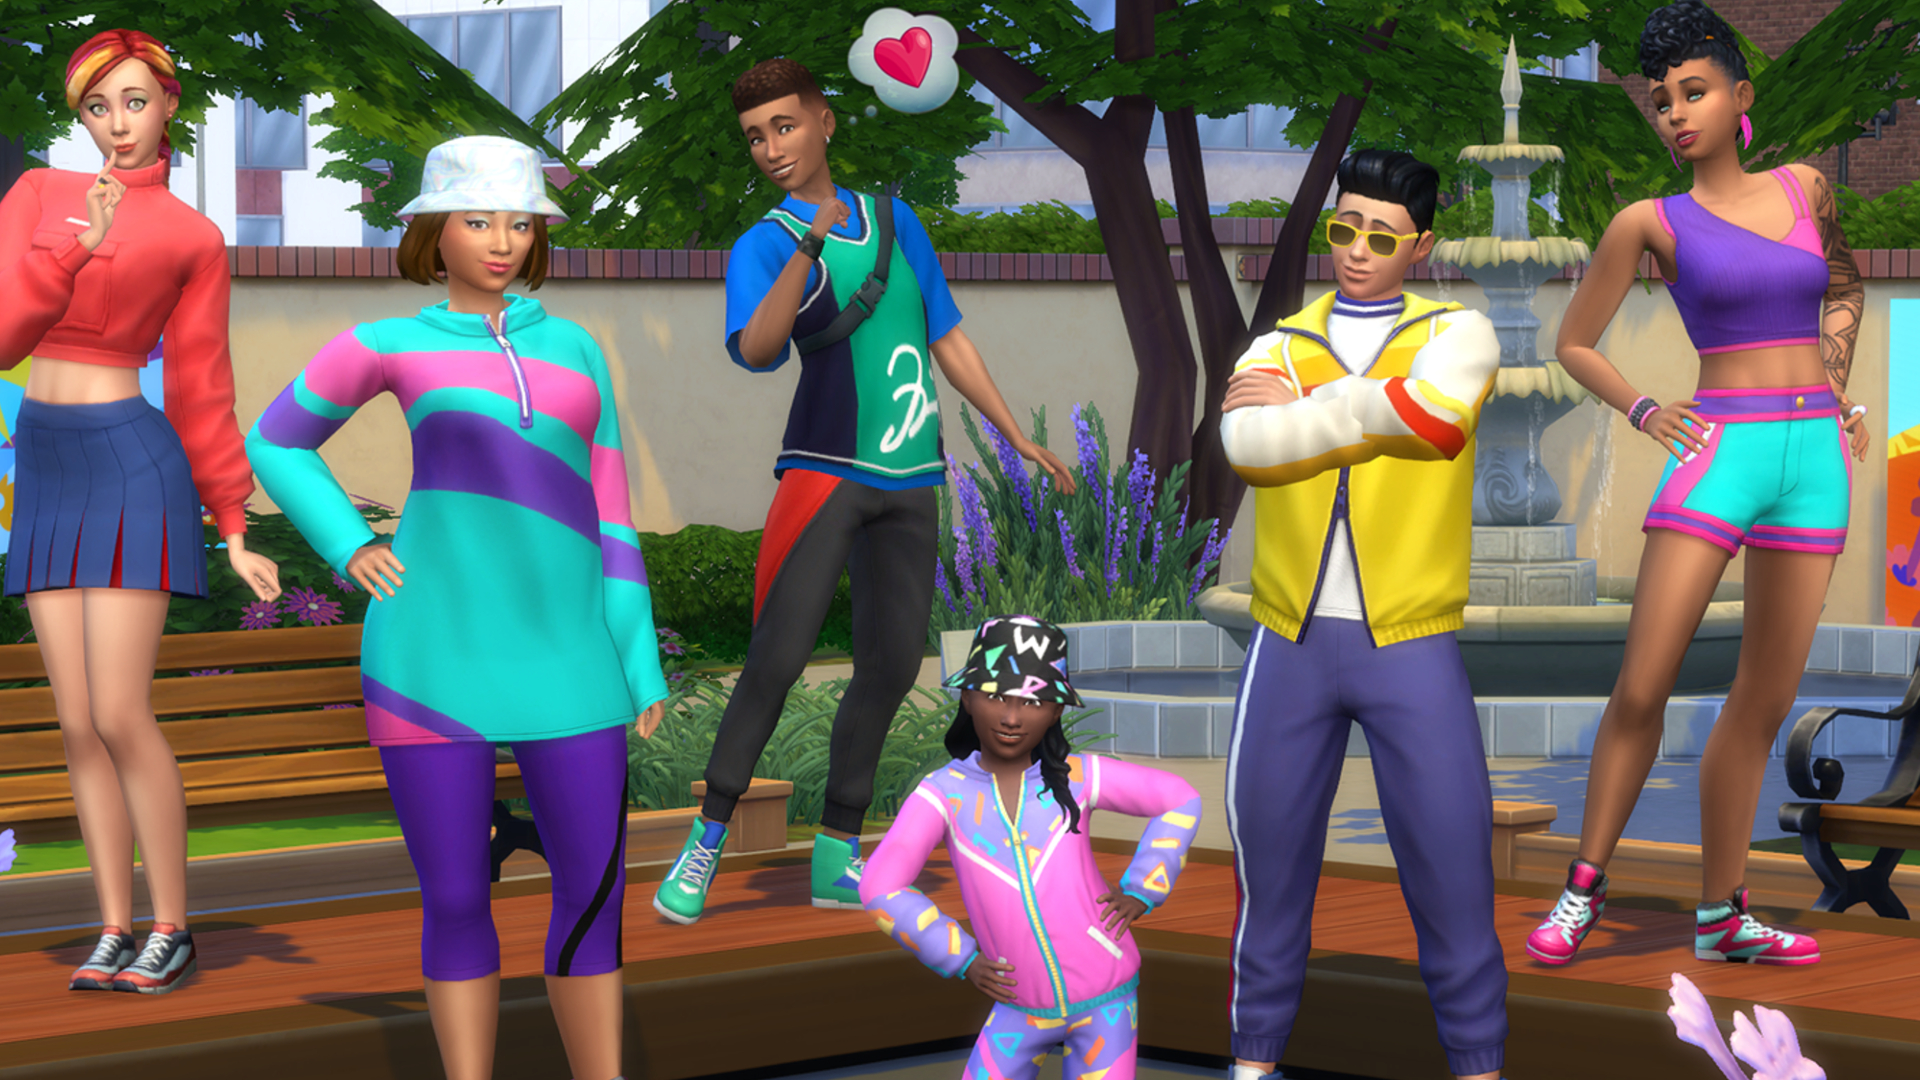  The Sims 4 has a new, smaller pack type for some reason 